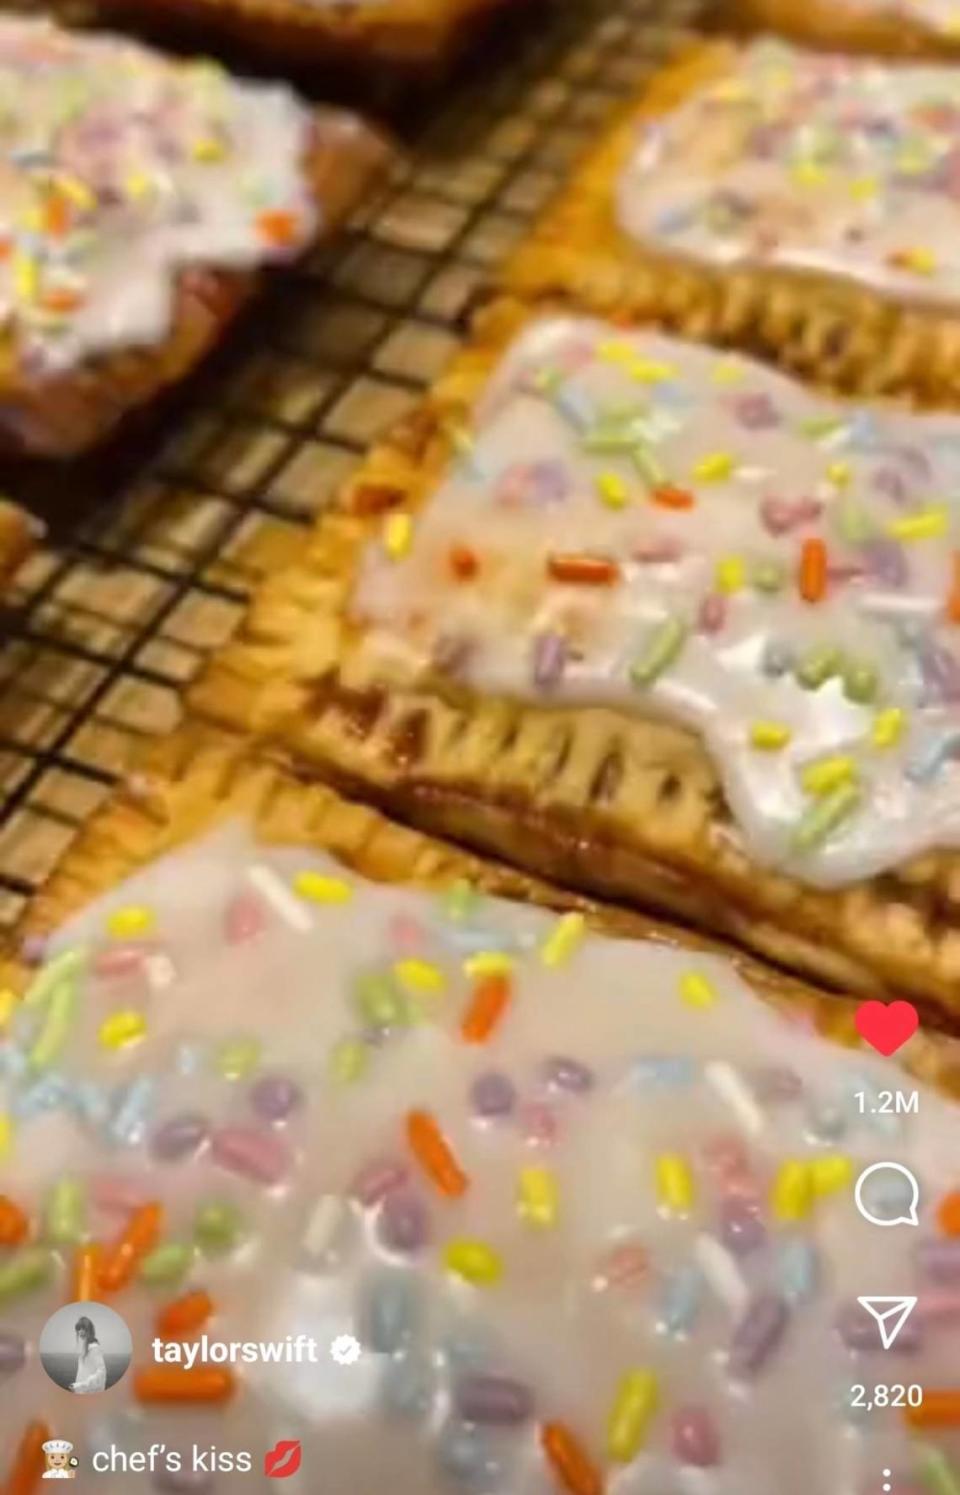 A picture of homemade Pop-Tarts Taylor Swift shared on TikTok three years ago.